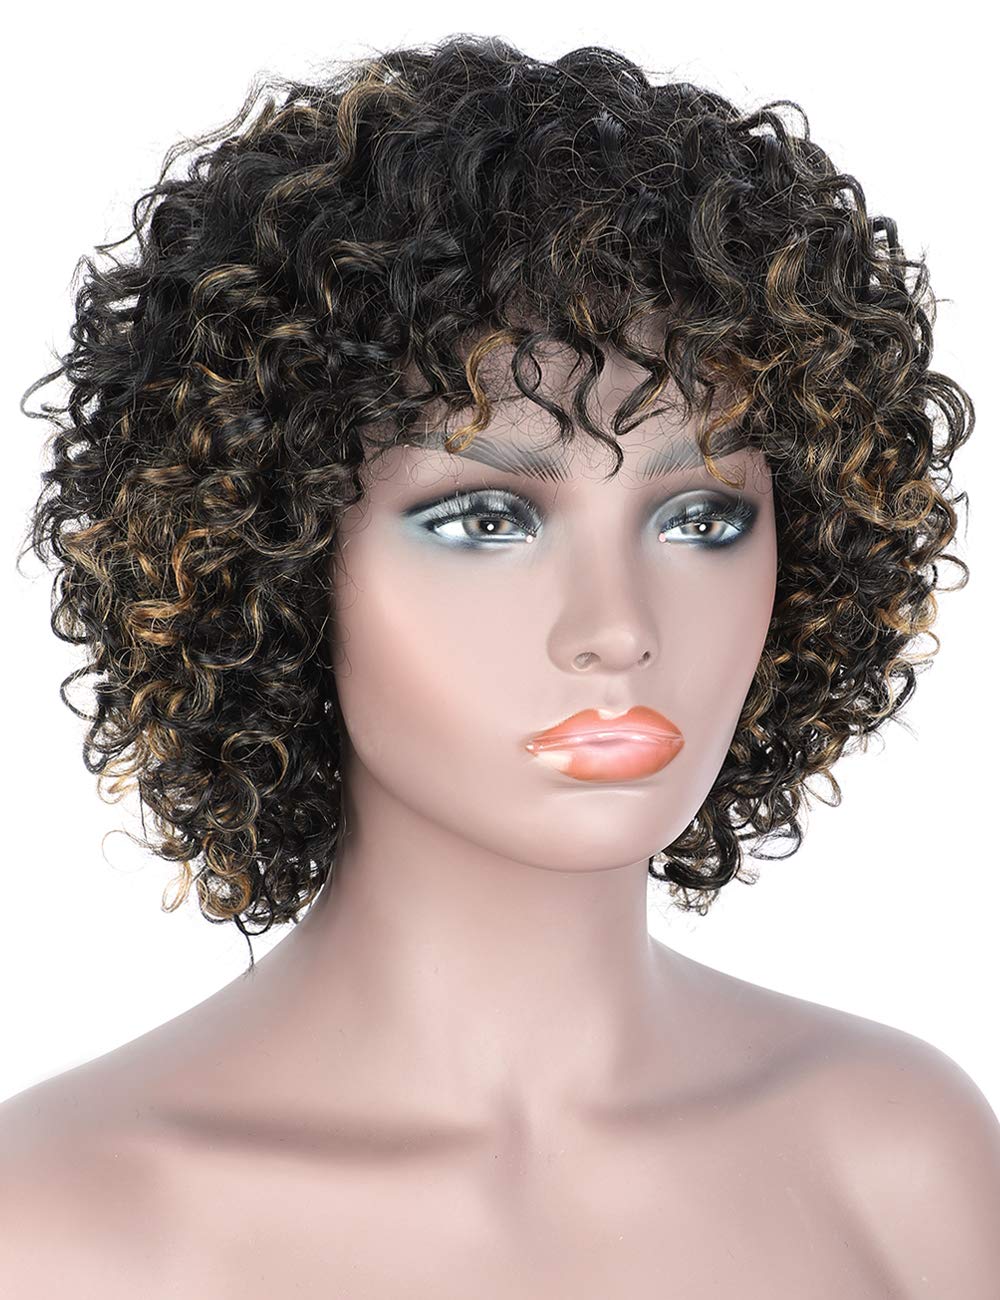 Beauart Short Black And Brown Highlights Deep Small Curly 100 Brazilian Remy Human Hair Wigs For